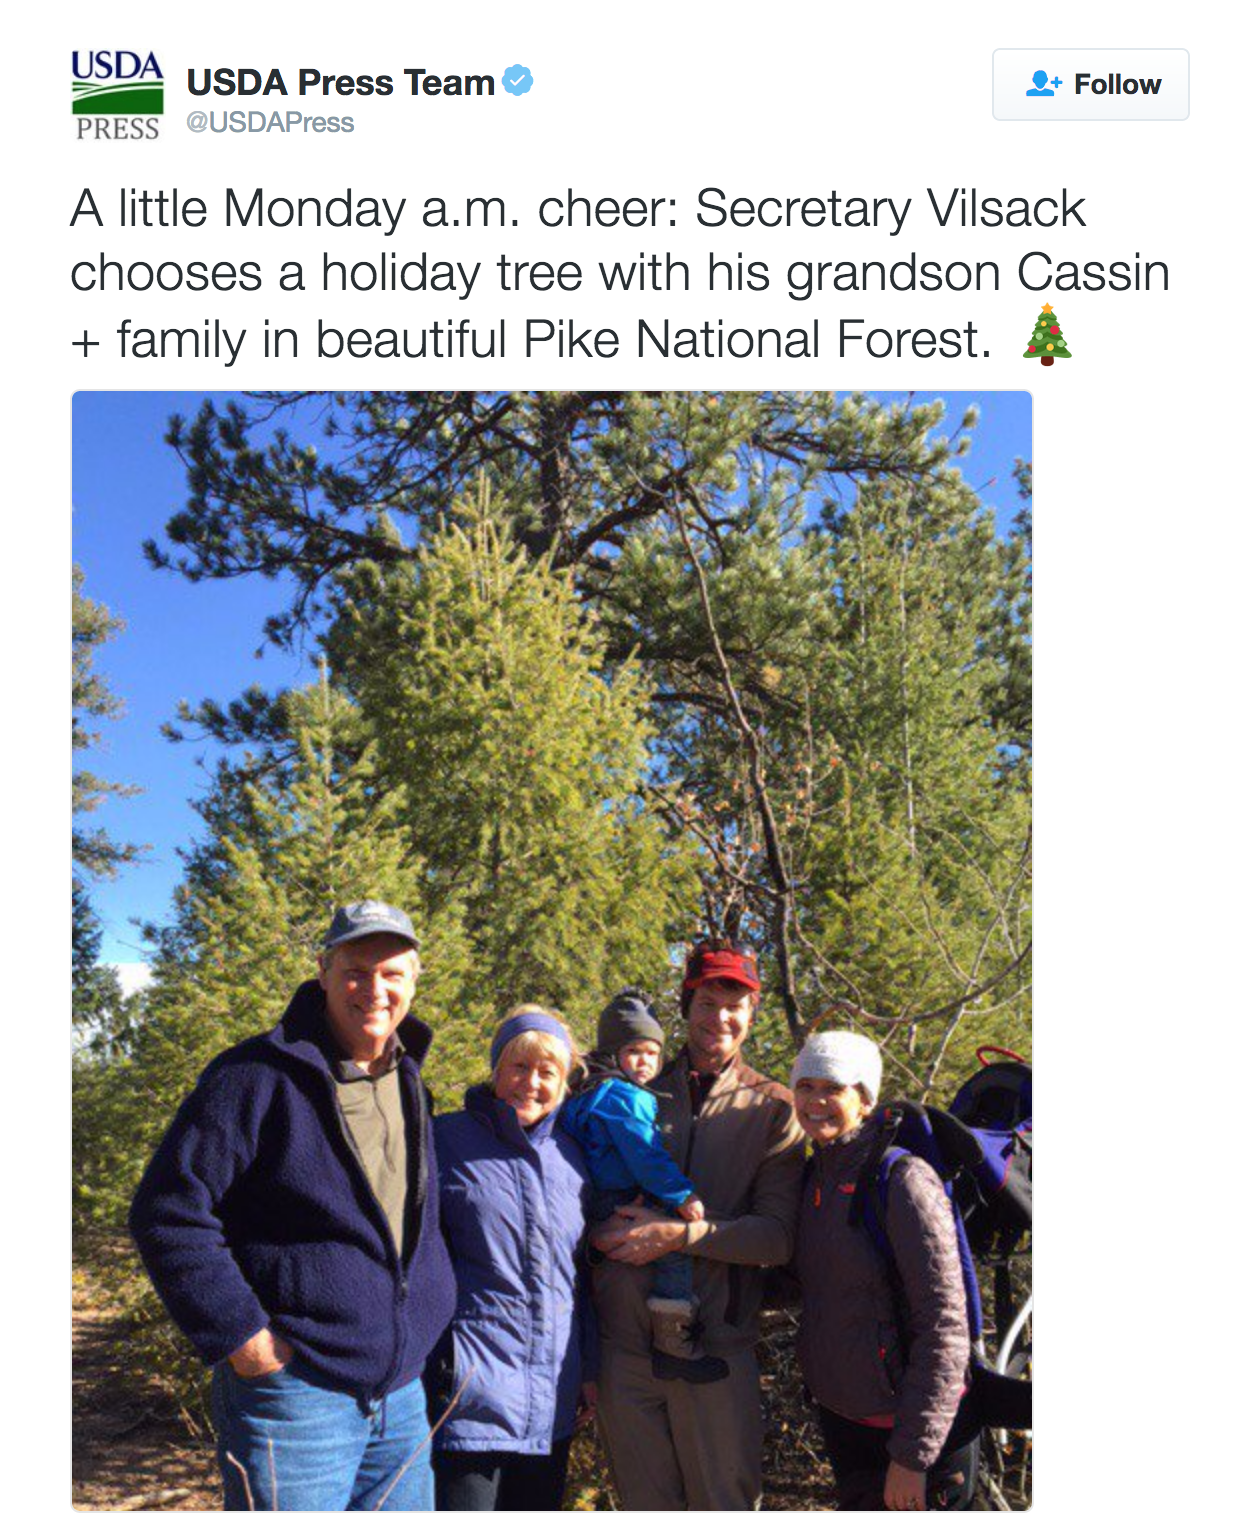 A little Monday a.m. cheer: Secretary Vilsack chooses a holiday tree with his grandson Cassin + family in beautiful Pike National Forest. 🎄